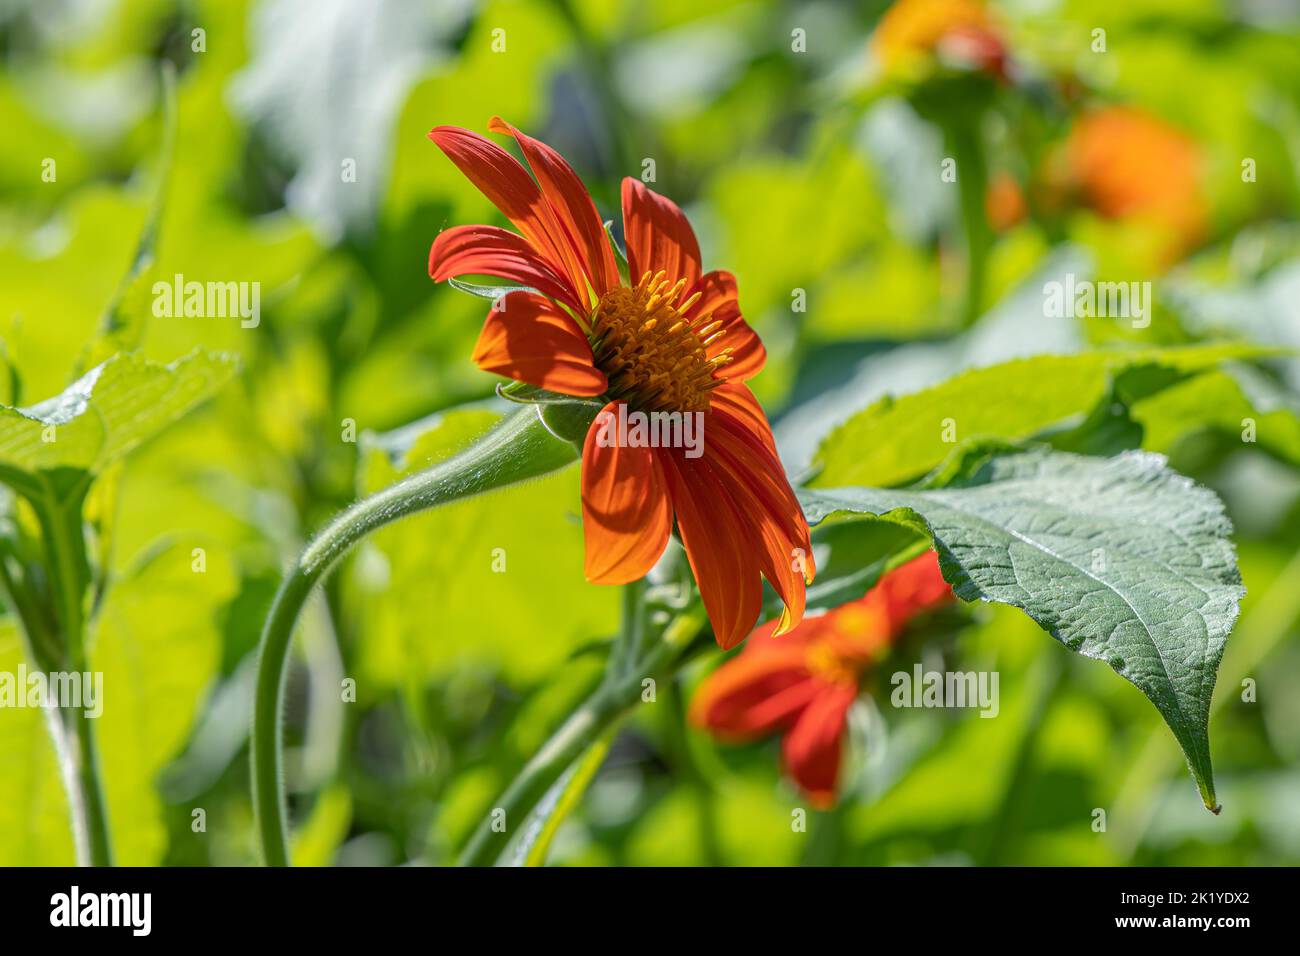 Mexican Sunflower. Stock Photo